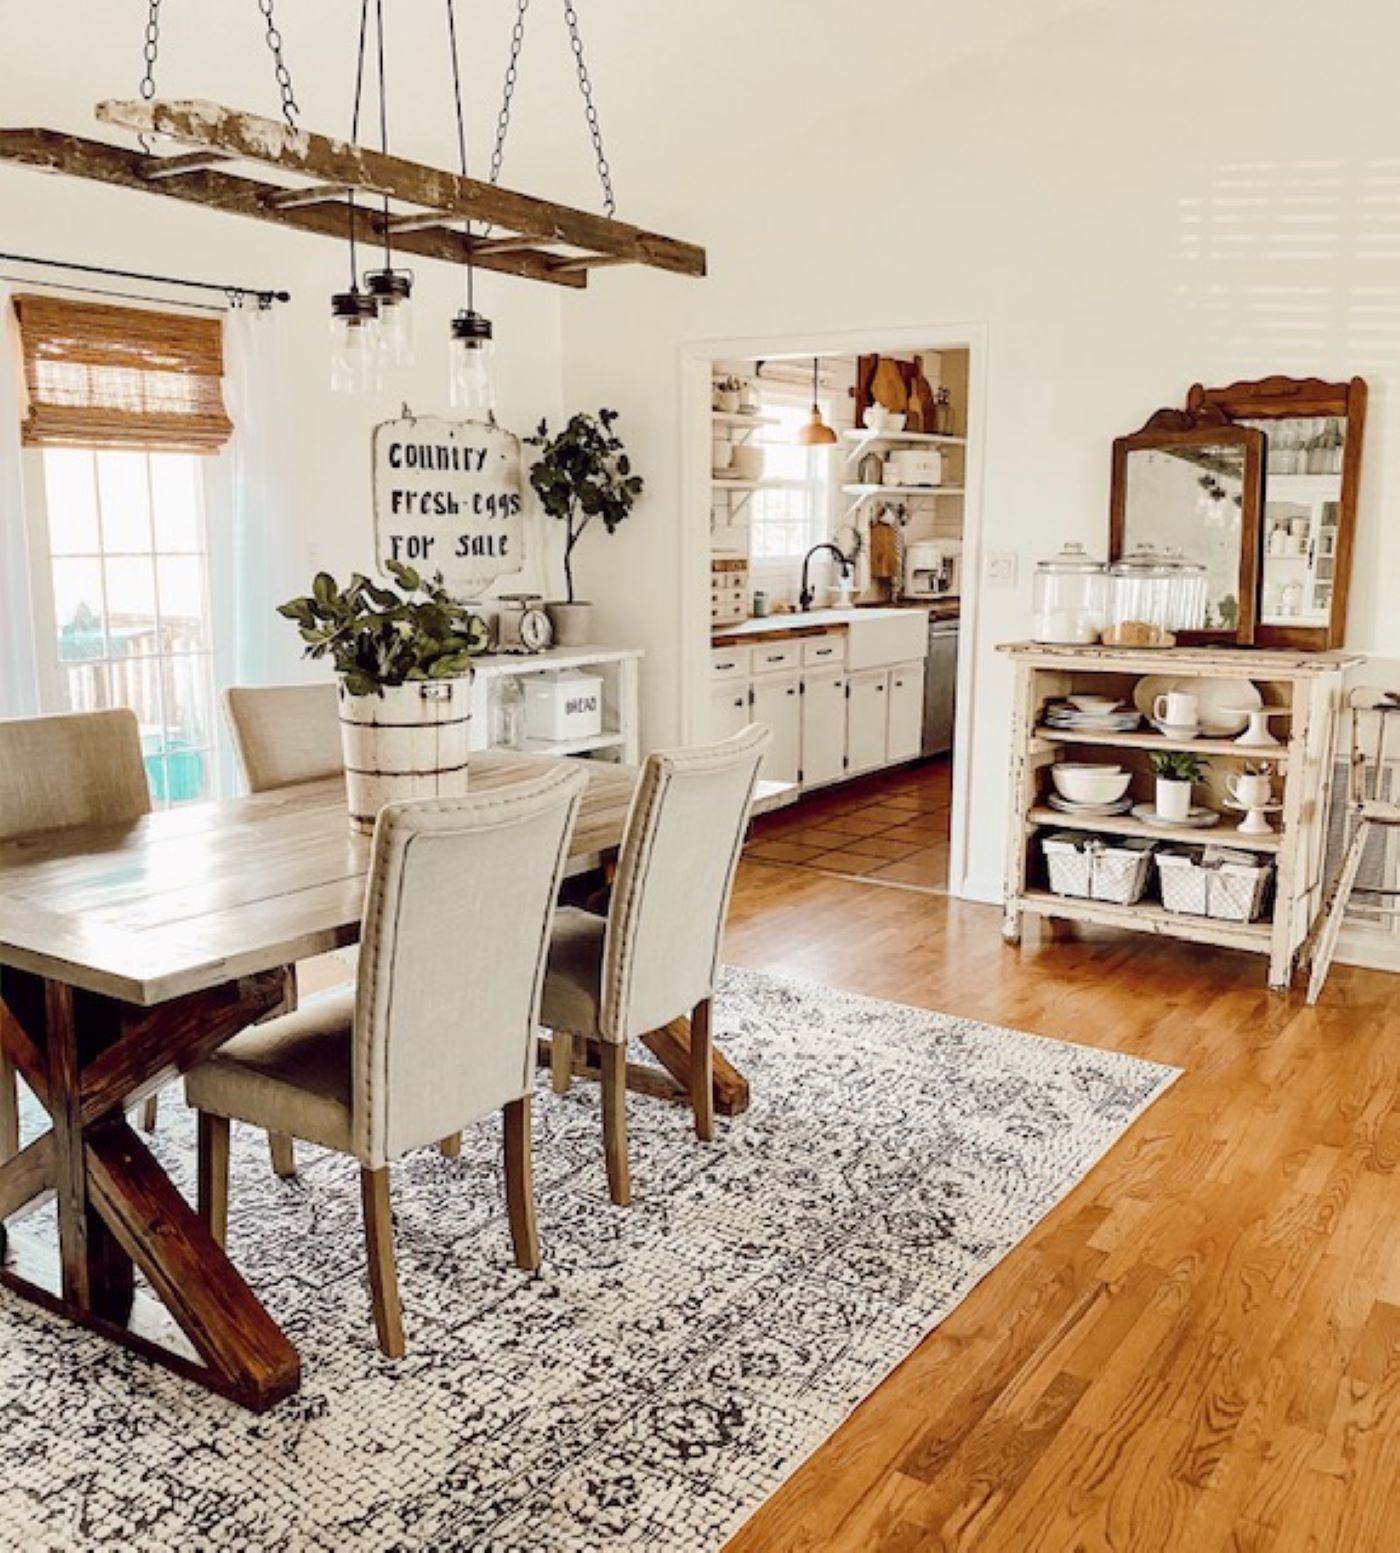 A dining room with a wood floor and a vintage style rug under a table and set of chairs. Above the table is a chandelier made with lights strung through a flea market painter’s ladder.